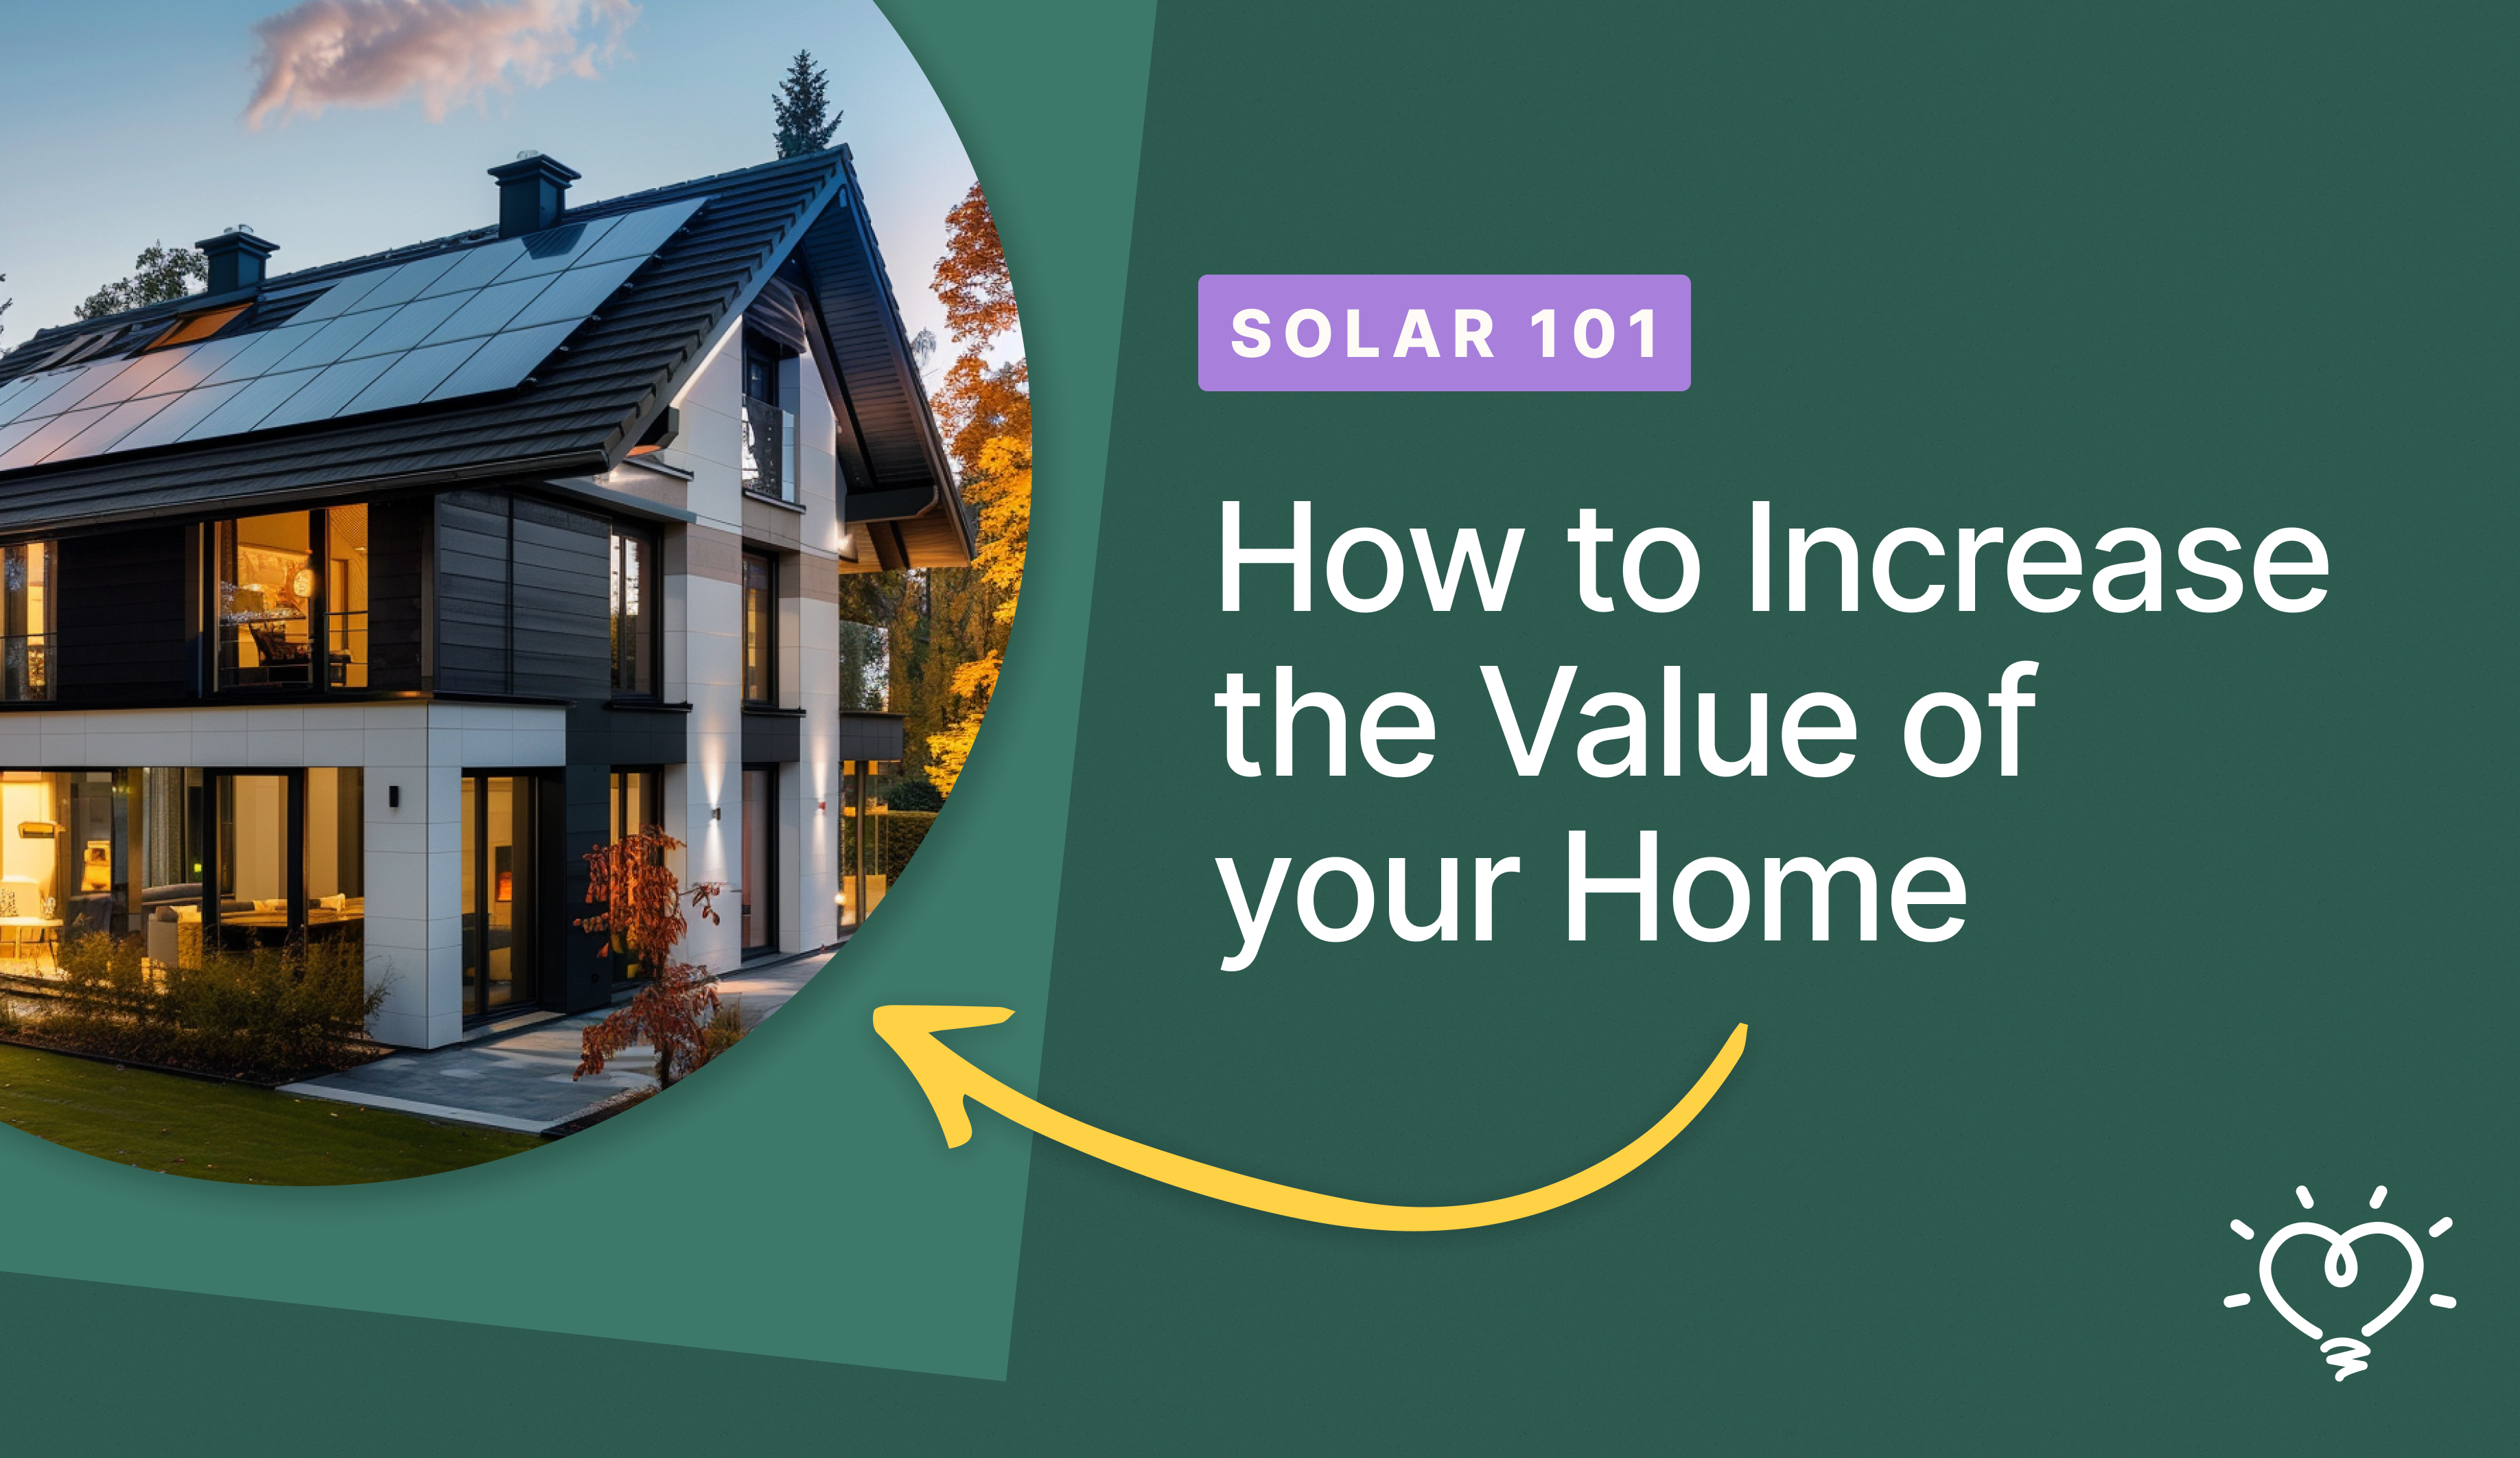 How to Increase the Value of your Home